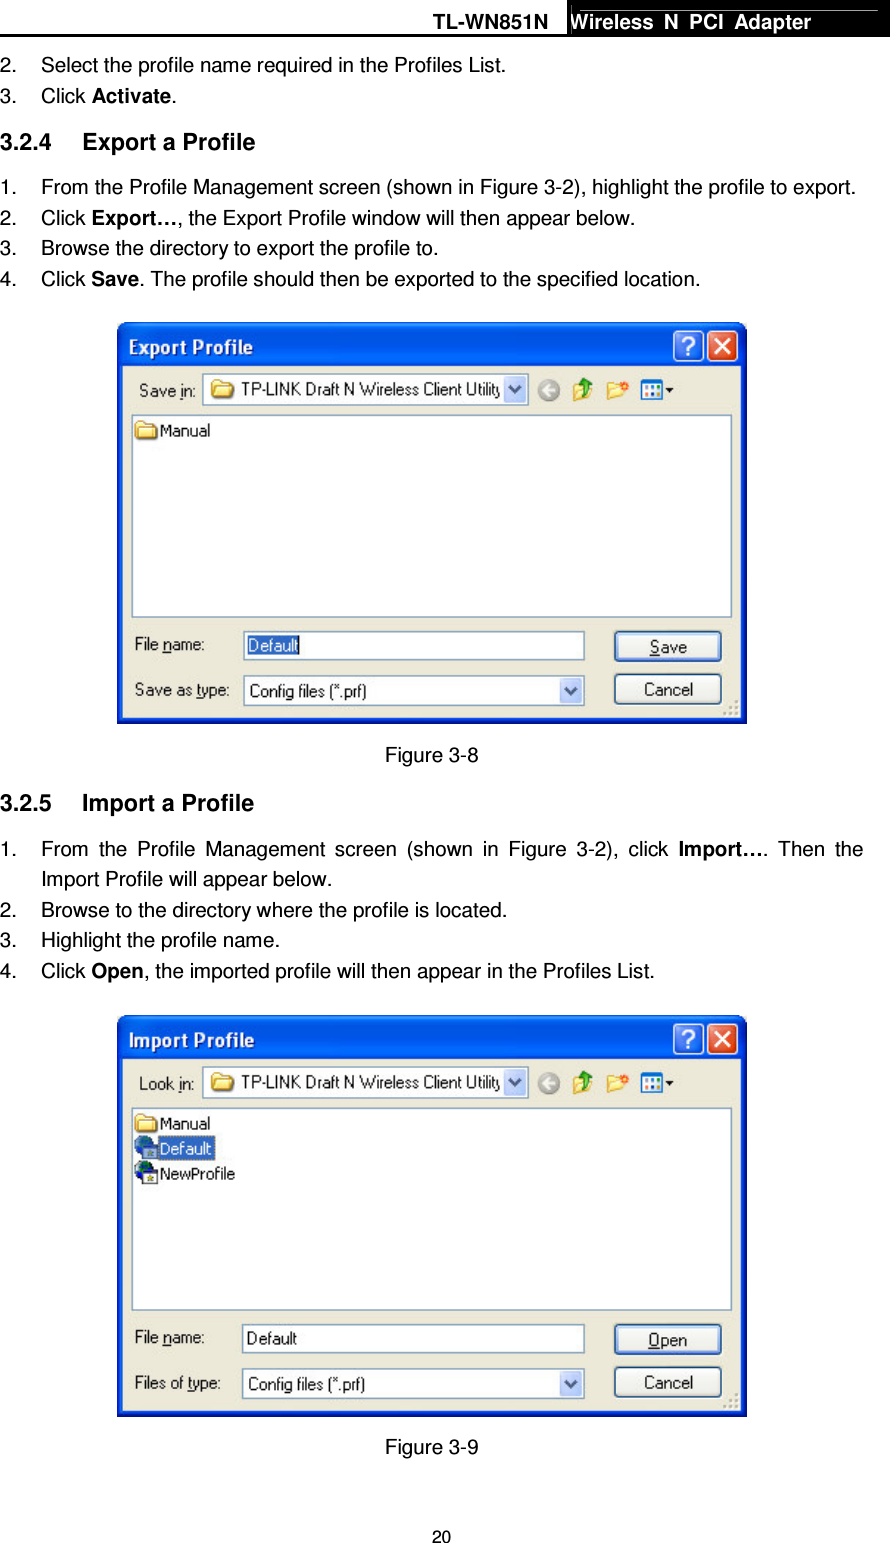 TL-WN851N Wireless  N  PCI  Adapter   202.  Select the profile name required in the Profiles List. 3.  Click Activate. 3.2.4  Export a Profile 1.  From the Profile Management screen (shown in Figure 3-2), highlight the profile to export. 2.  Click Export…, the Export Profile window will then appear below. 3.  Browse the directory to export the profile to. 4.  Click Save. The profile should then be exported to the specified location.  Figure 3-8 3.2.5  Import a Profile 1.  From  the  Profile  Management  screen  (shown  in  Figure  3-2),  click  Import….  Then  the Import Profile will appear below. 2.  Browse to the directory where the profile is located. 3.  Highlight the profile name. 4.  Click Open, the imported profile will then appear in the Profiles List.  Figure 3-9 